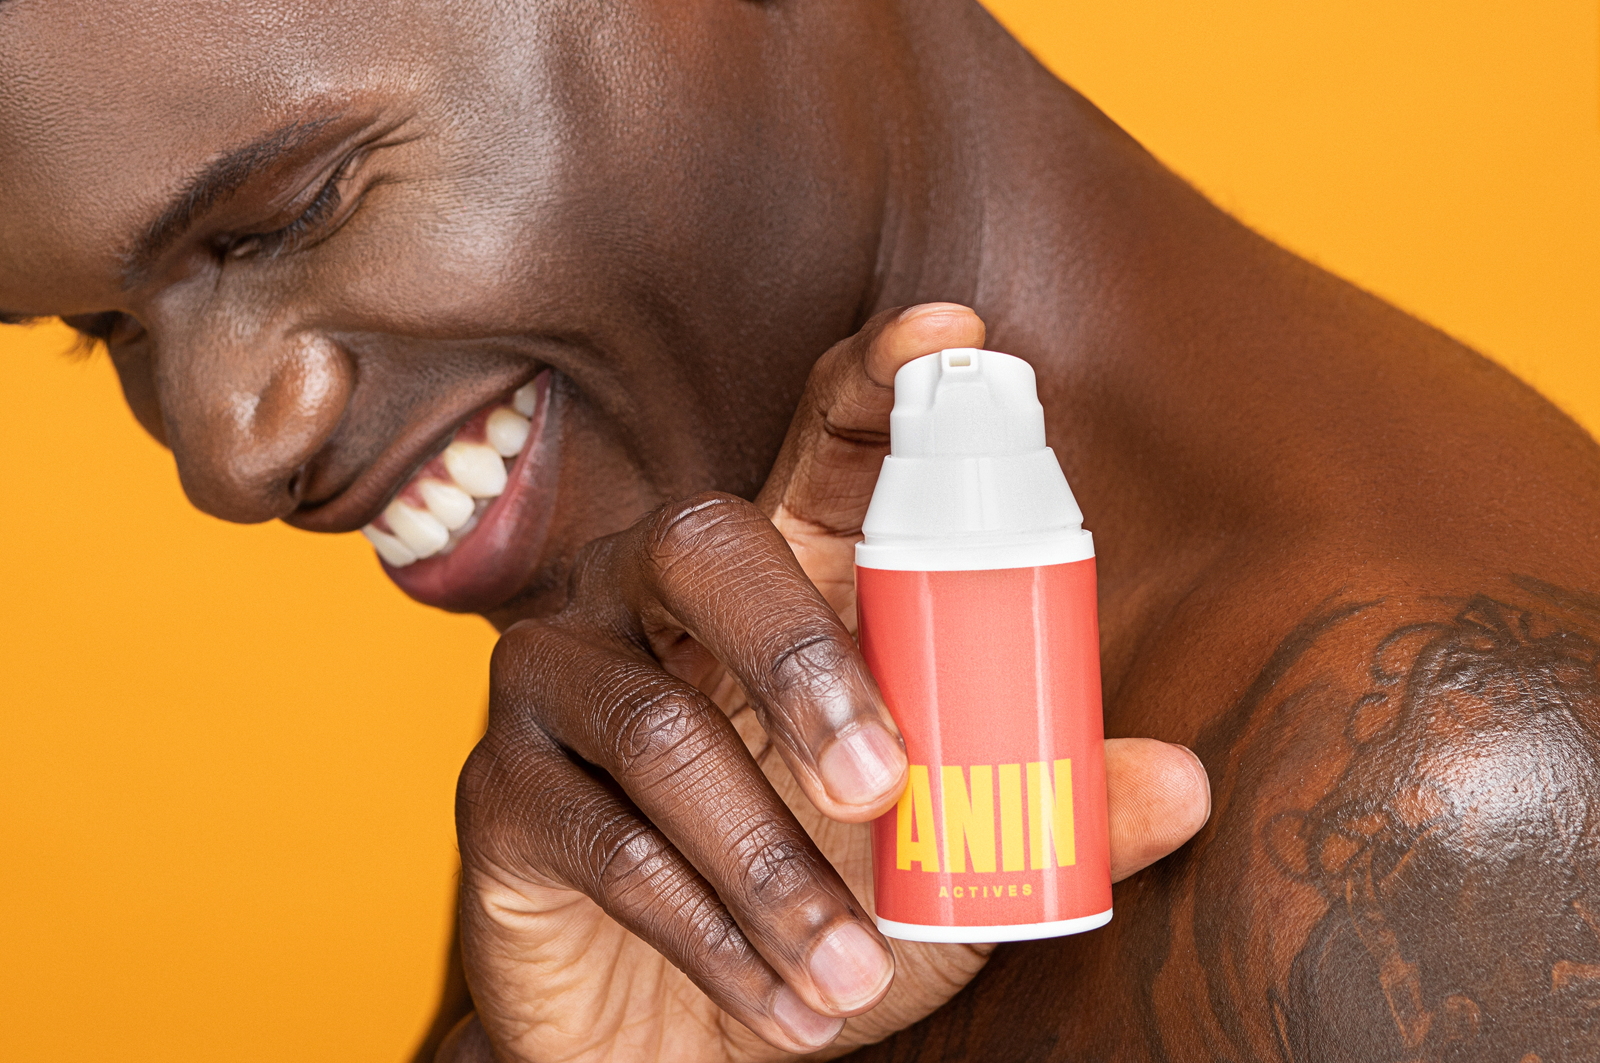 Male model with tatoo on his left sholder holding an ANIN Actives presctiption bottles. The ANIN Actives bottle has white dispenser and red label with a ANIN Actives logo in yellow.